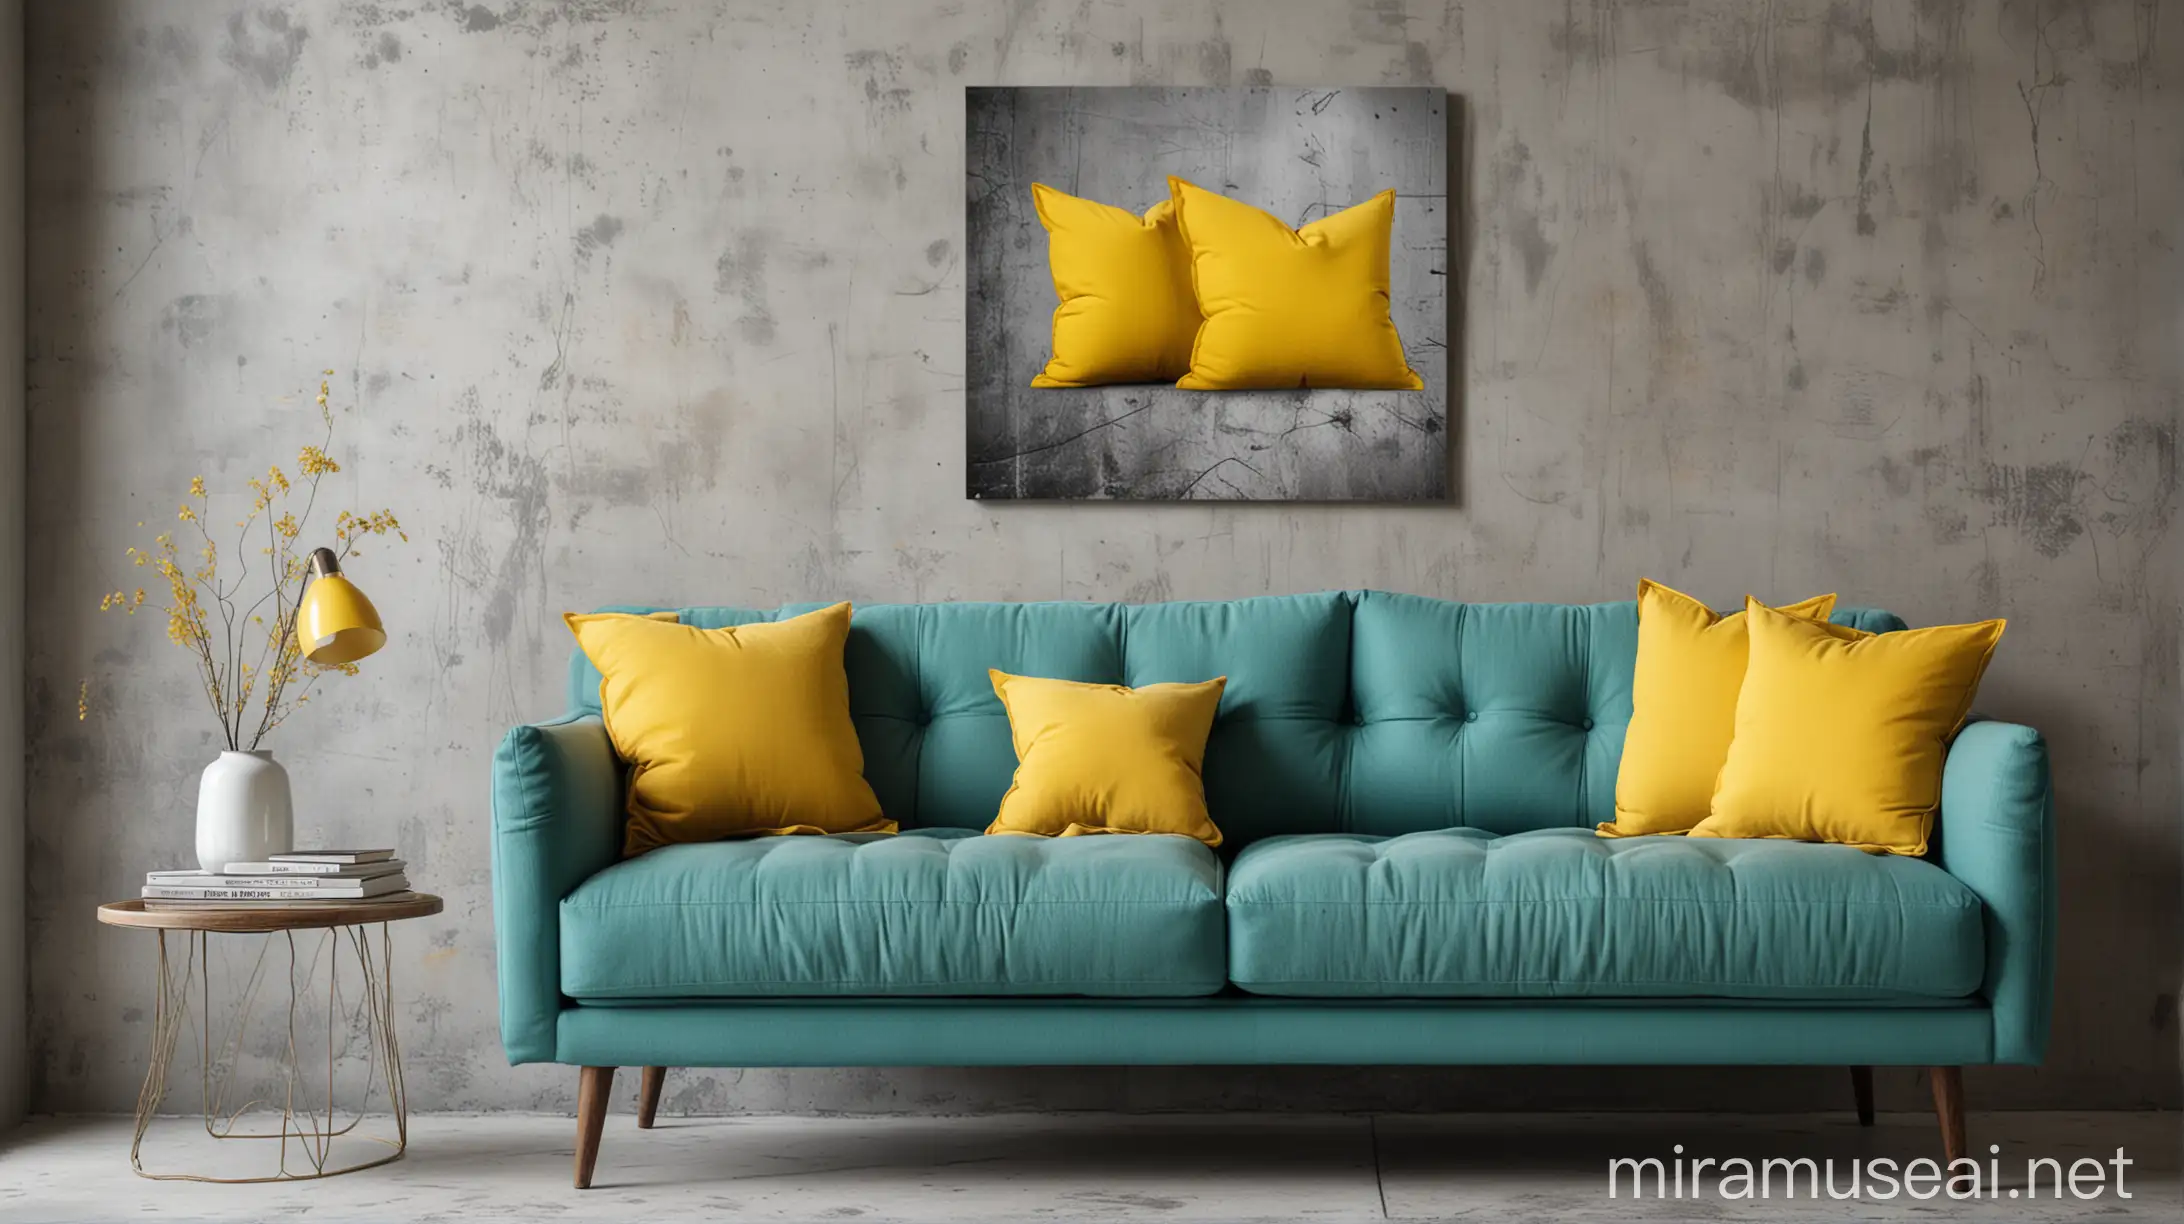 A vibrant and energetic photo of a teal sofa with vibrant yellow pillows against a grey stucco or concrete wall with an art poster. The color palette is bold and playful, with pops of teal, yellow, and grey.